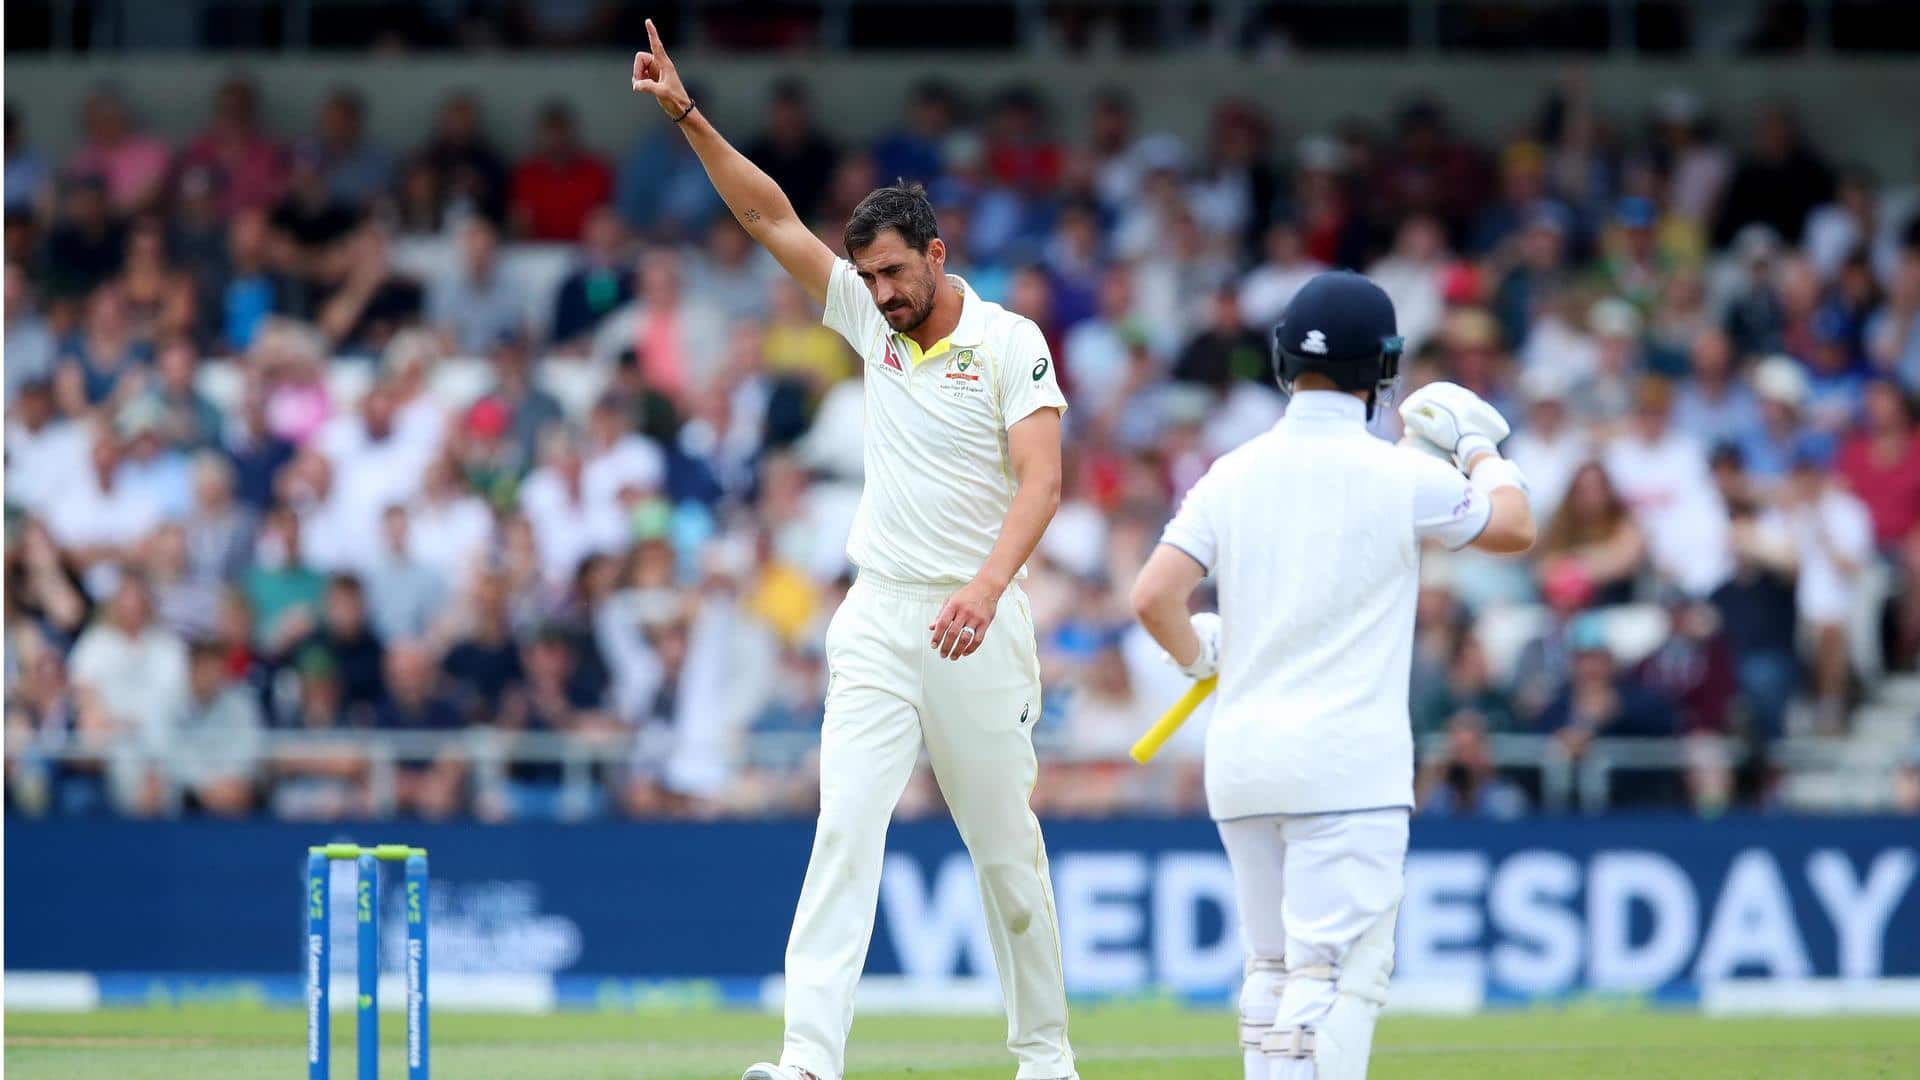 Ashes: Mitchell Starc's incredible fifer at Headingley goes in vain